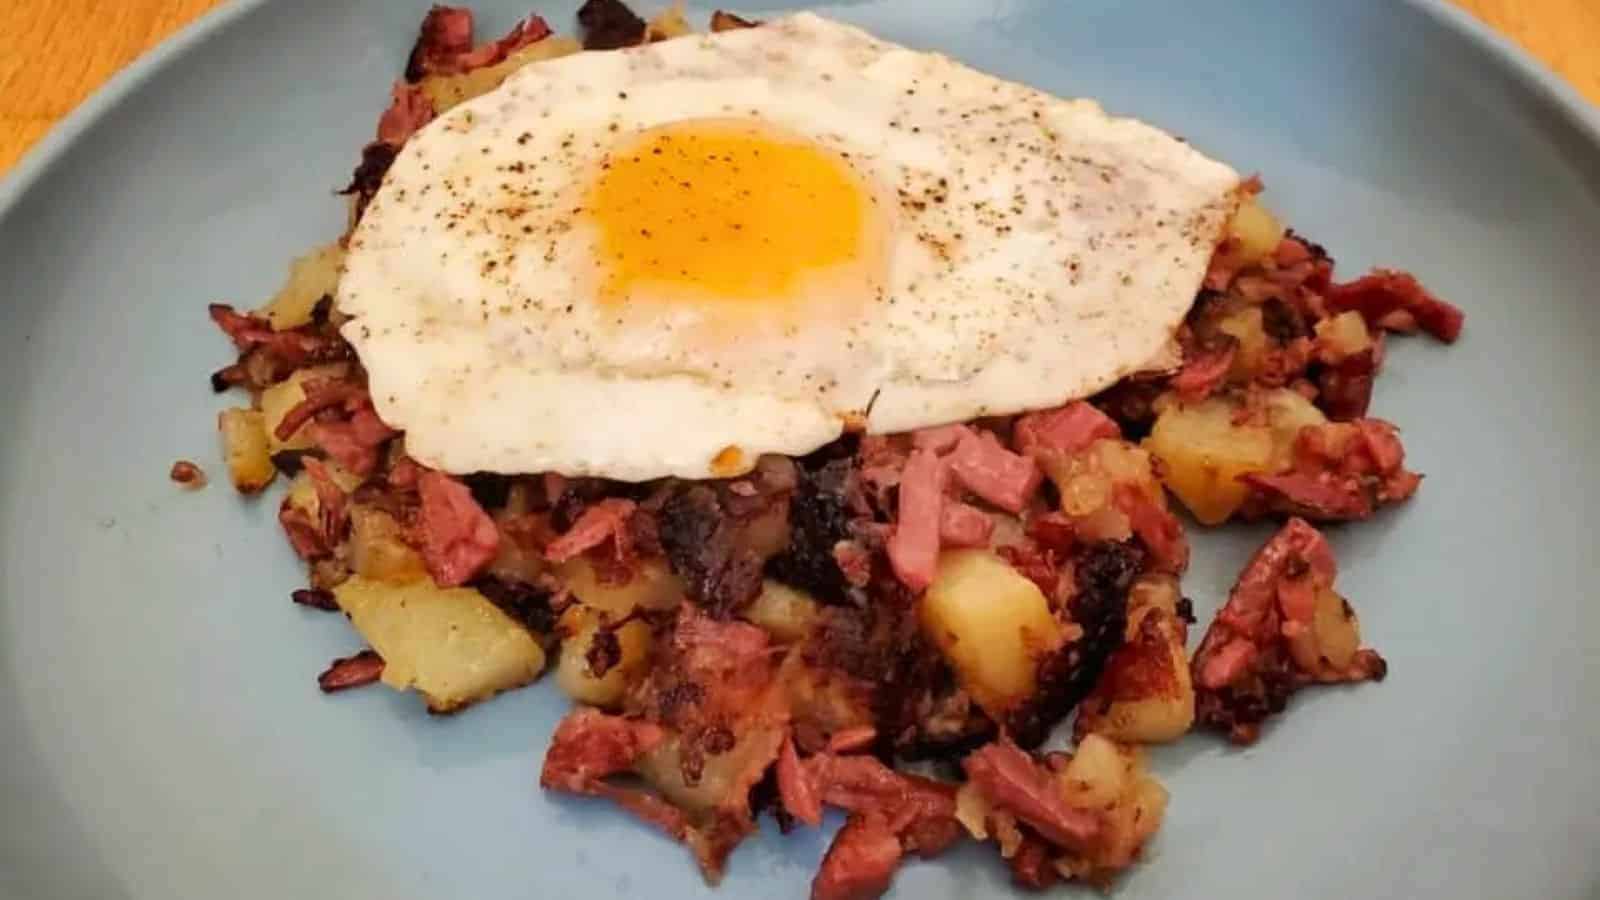 Image shows Corned Beef Hash with a fried egg on top in a blue plate.